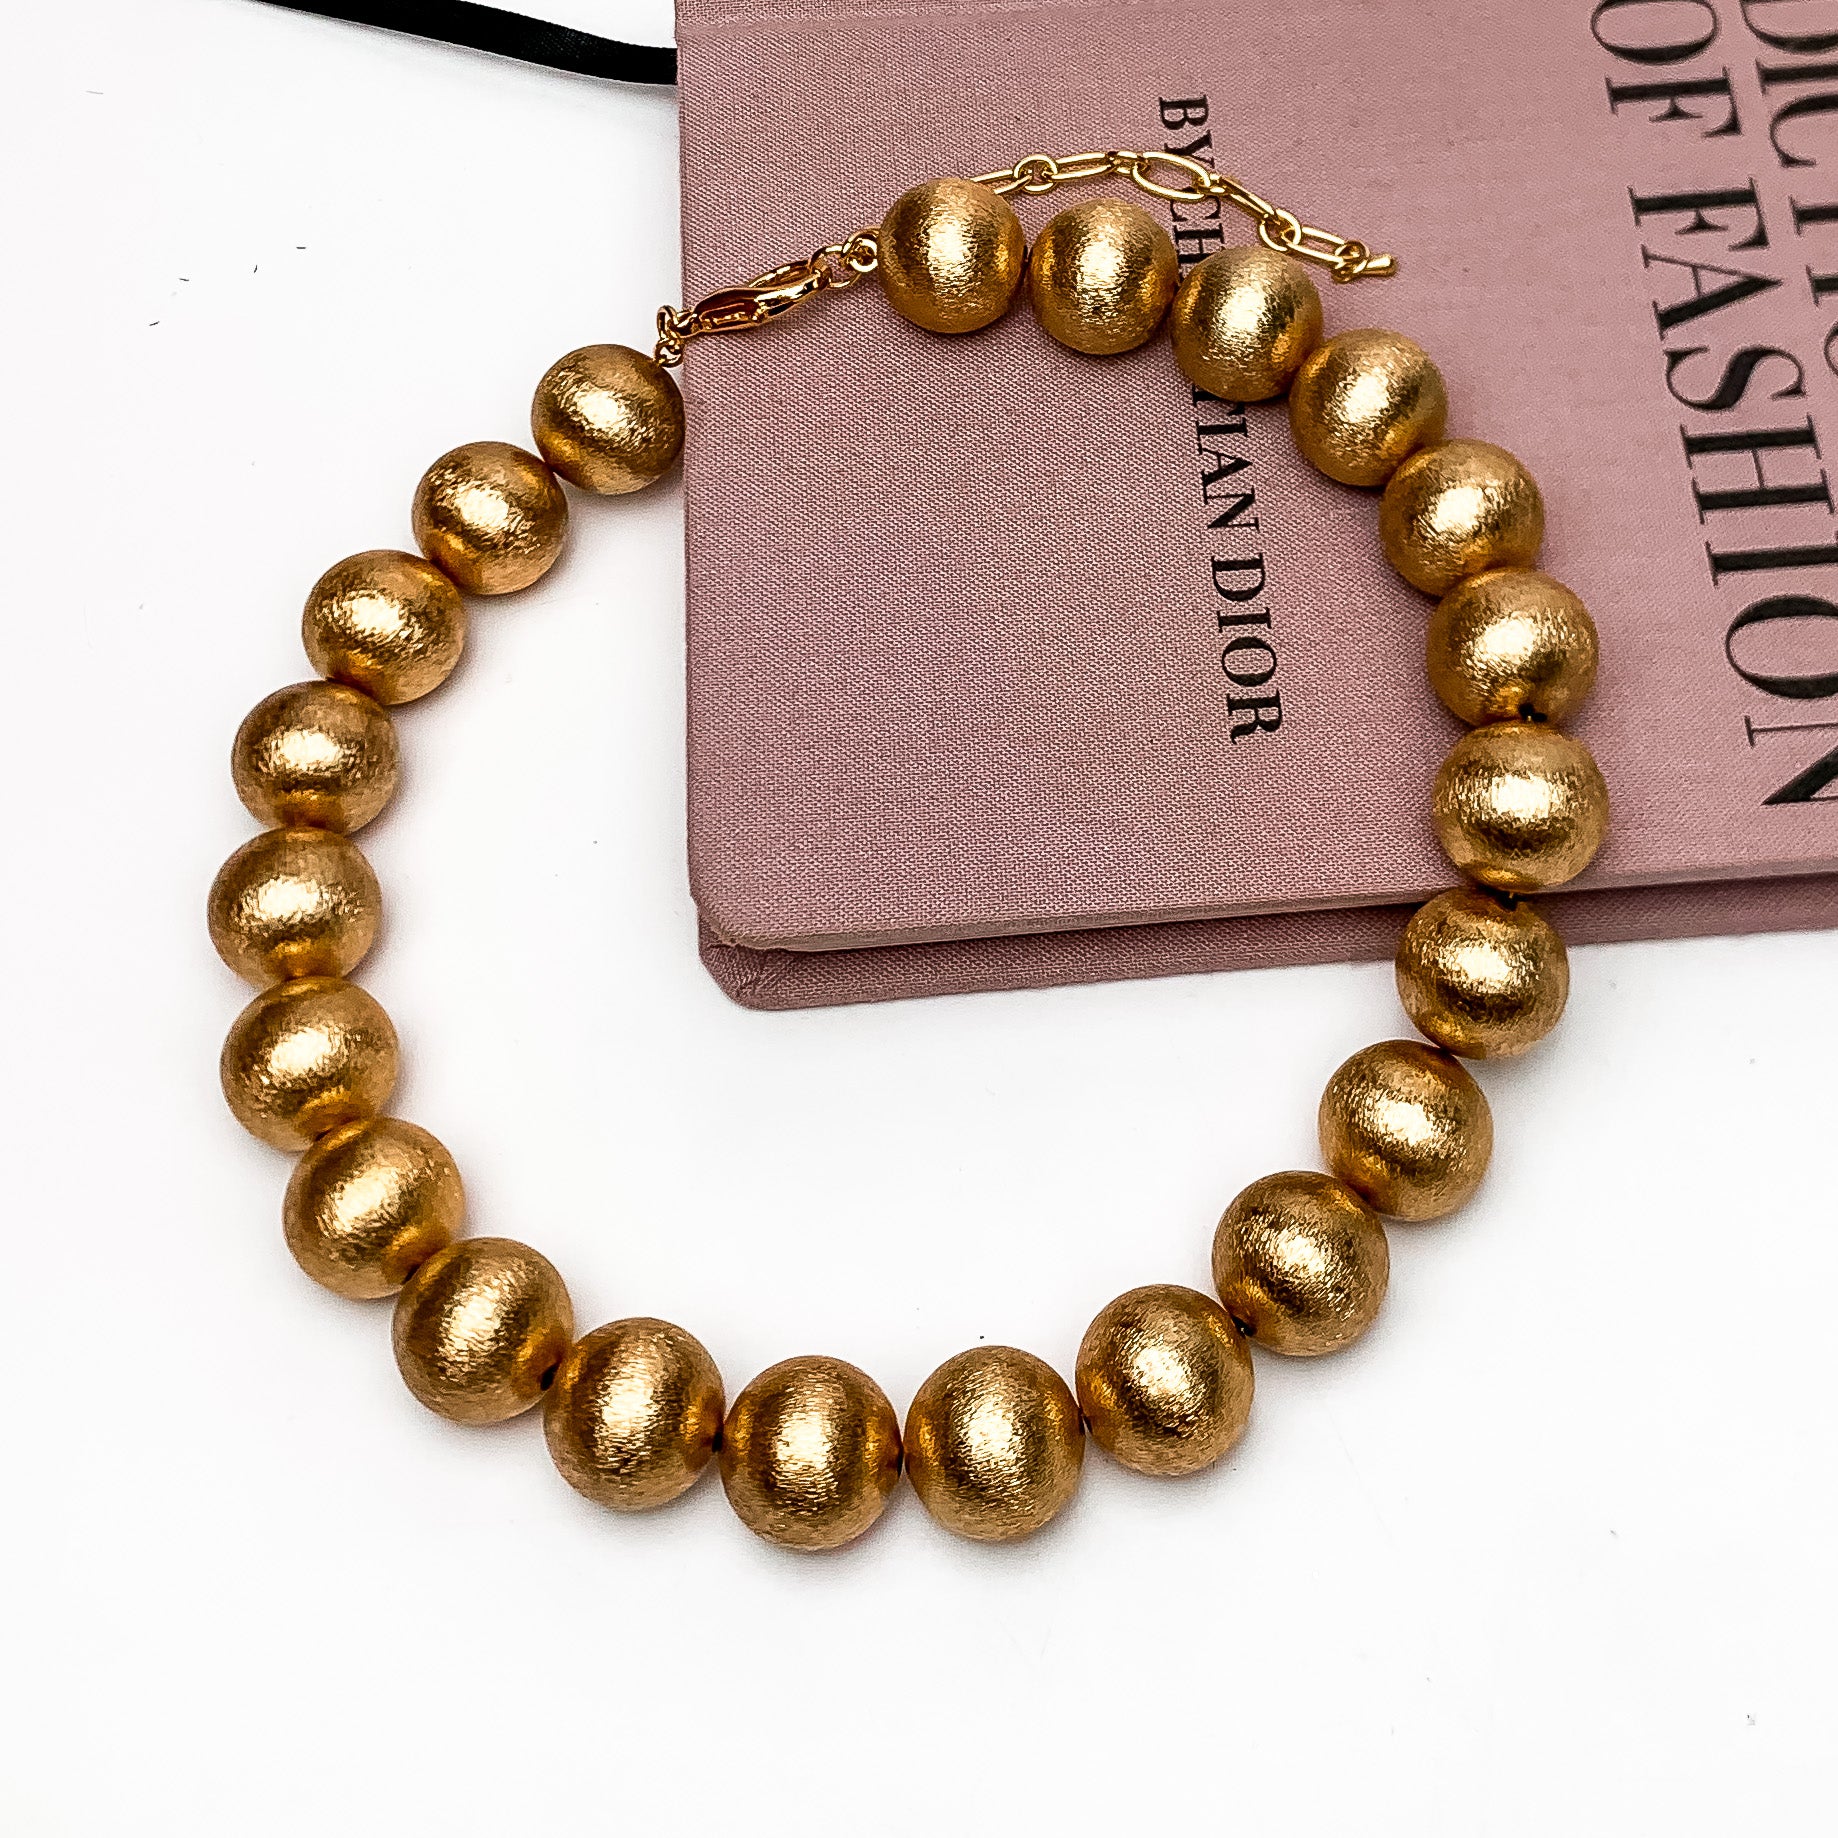 Large Gold Tone Beaded Necklace. This necklace is picktured laying on the side of a pink book with a white background.